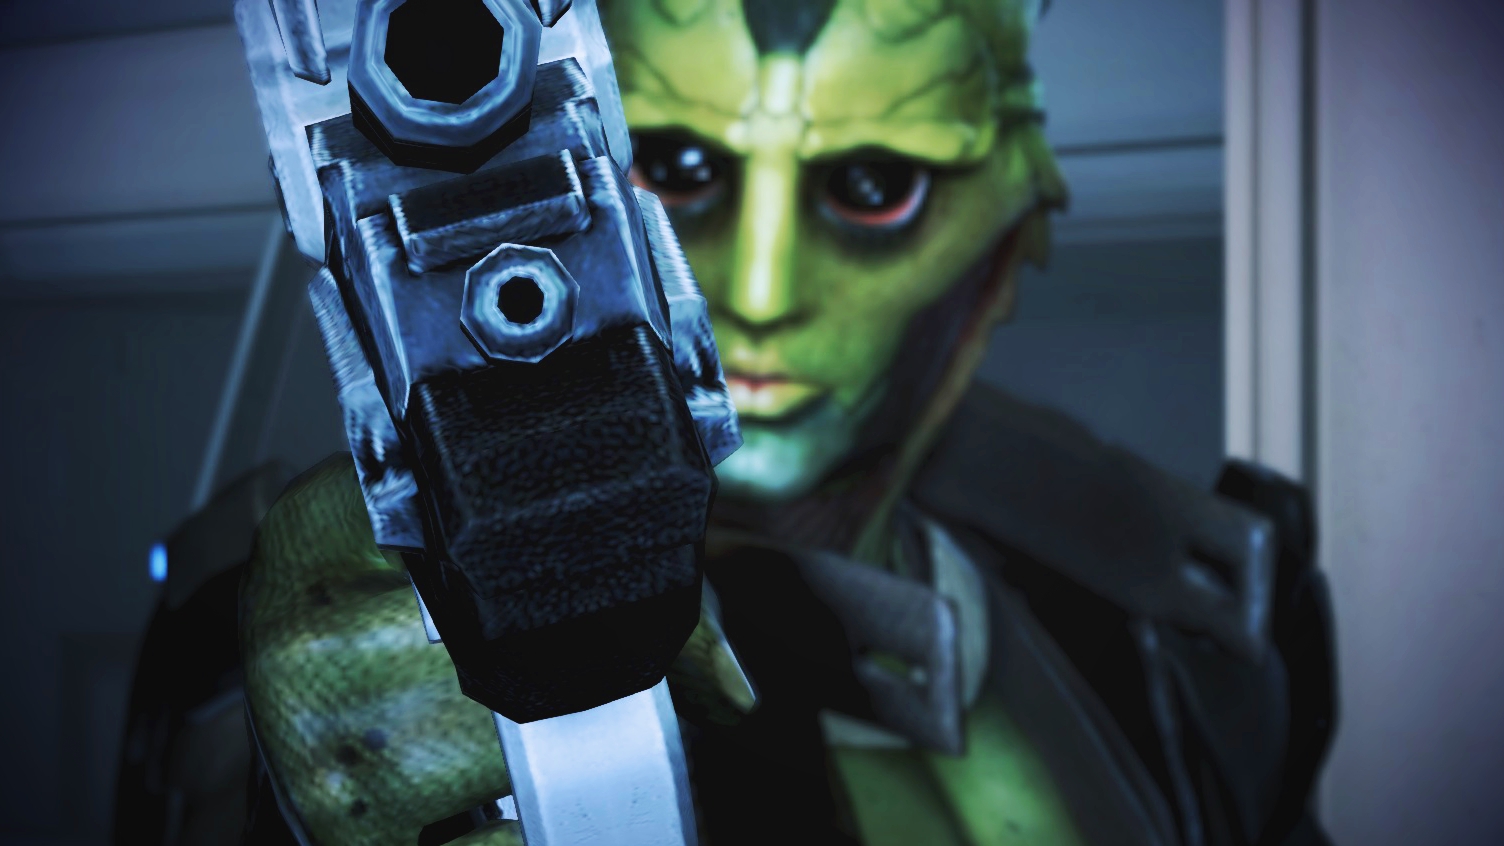 Download mobile wallpaper Thane Krios, Mass Effect, Video Game for free.